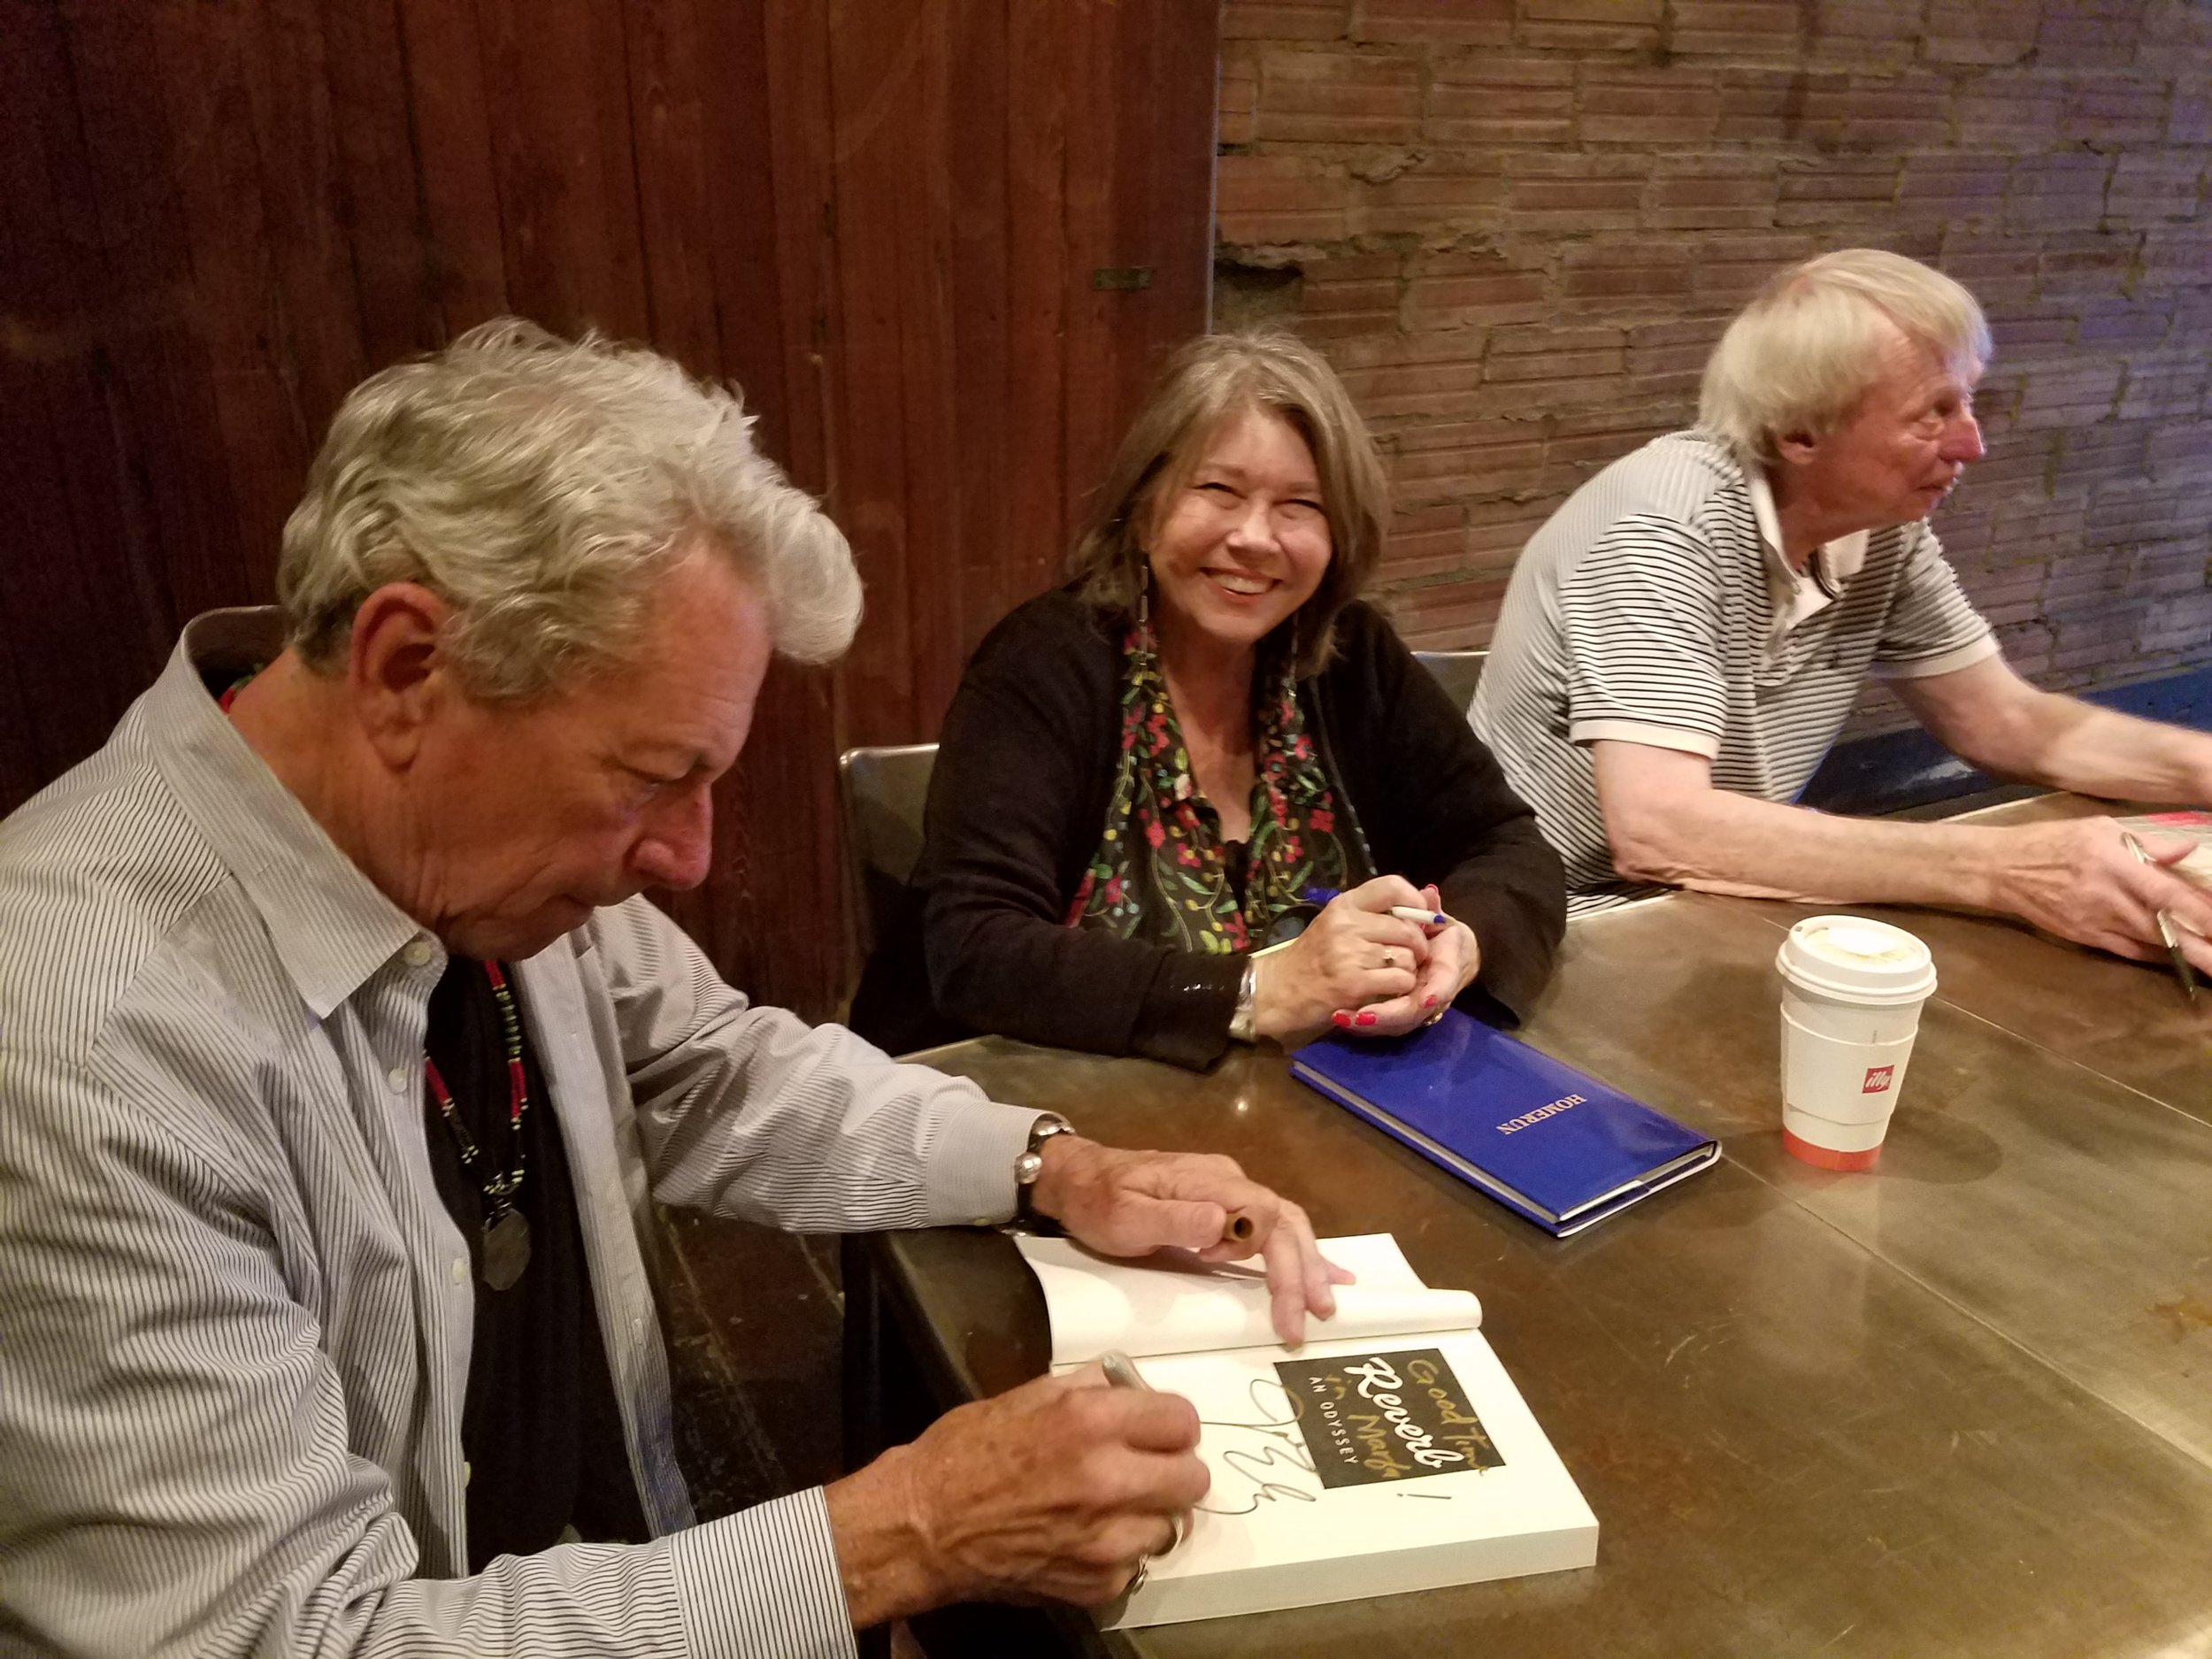 Jo Harvey Allen, just after a giving a wonderful reading at the Crowley Theater in Marfa. Her book, "Homerun," has funny, tender stories of her Lubbock childhood. That's Joe Ely on the left. 